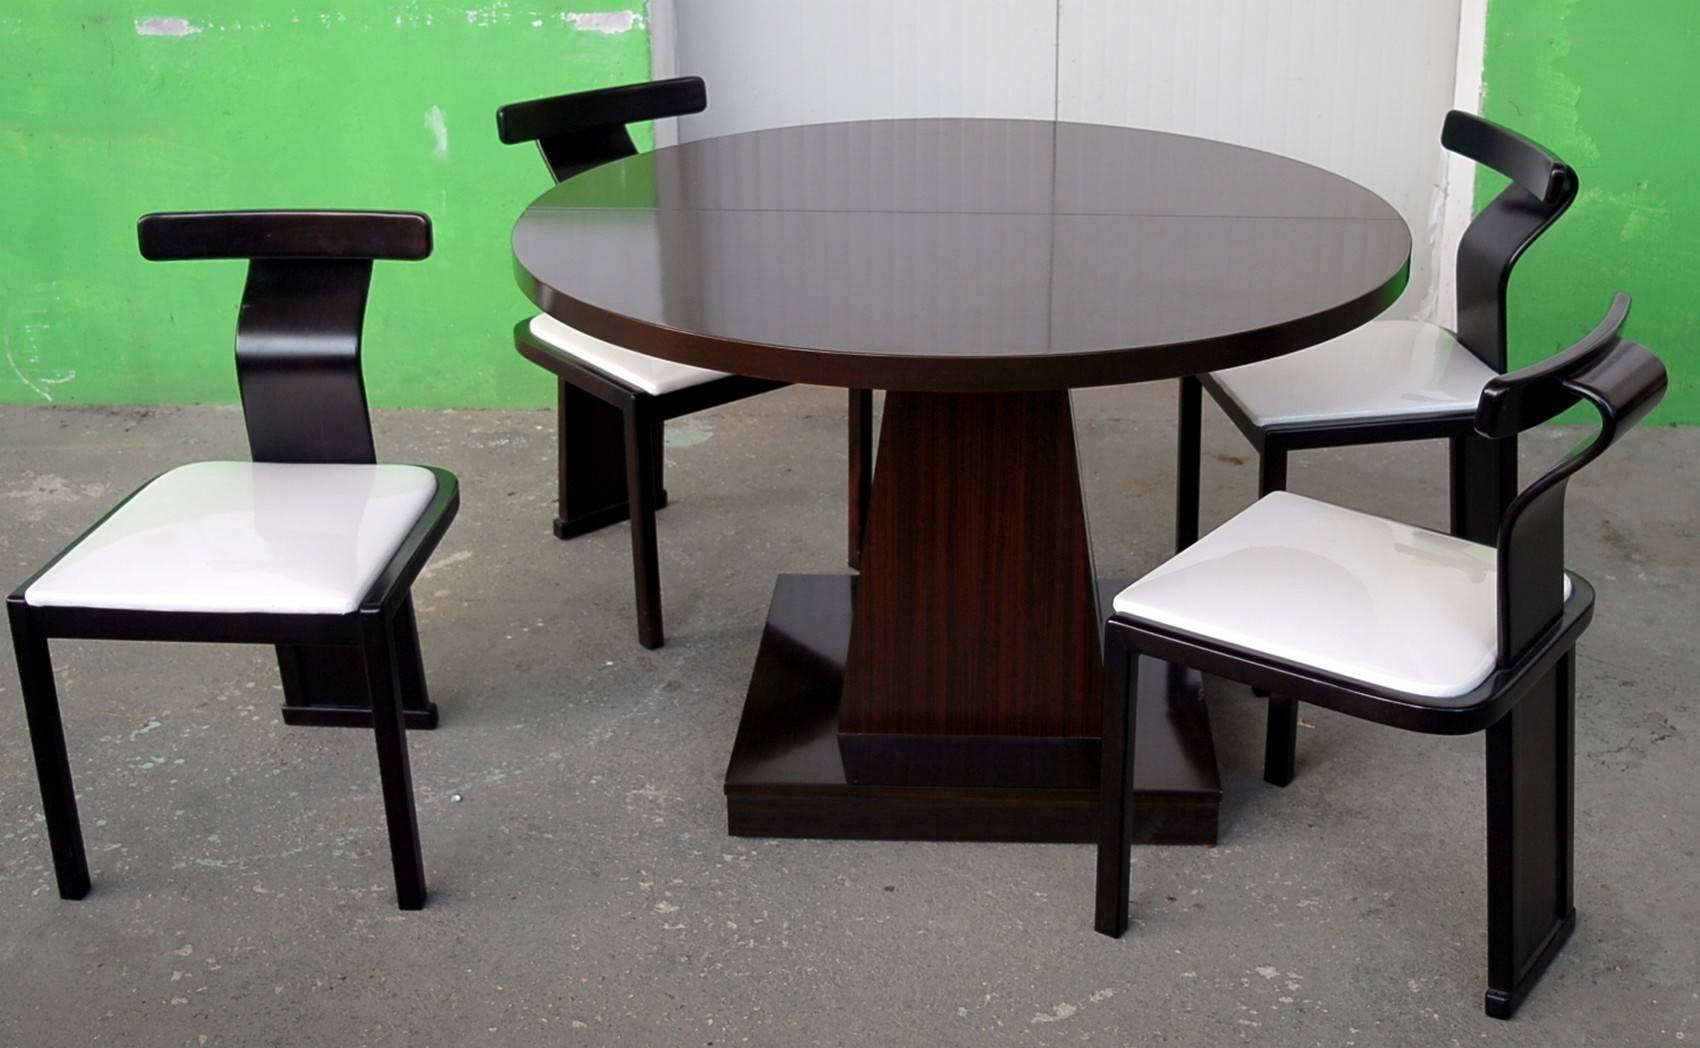 Four Chairs and Table Midcentury Set, Saporiti, Introini and Willy Rizzo Design 2